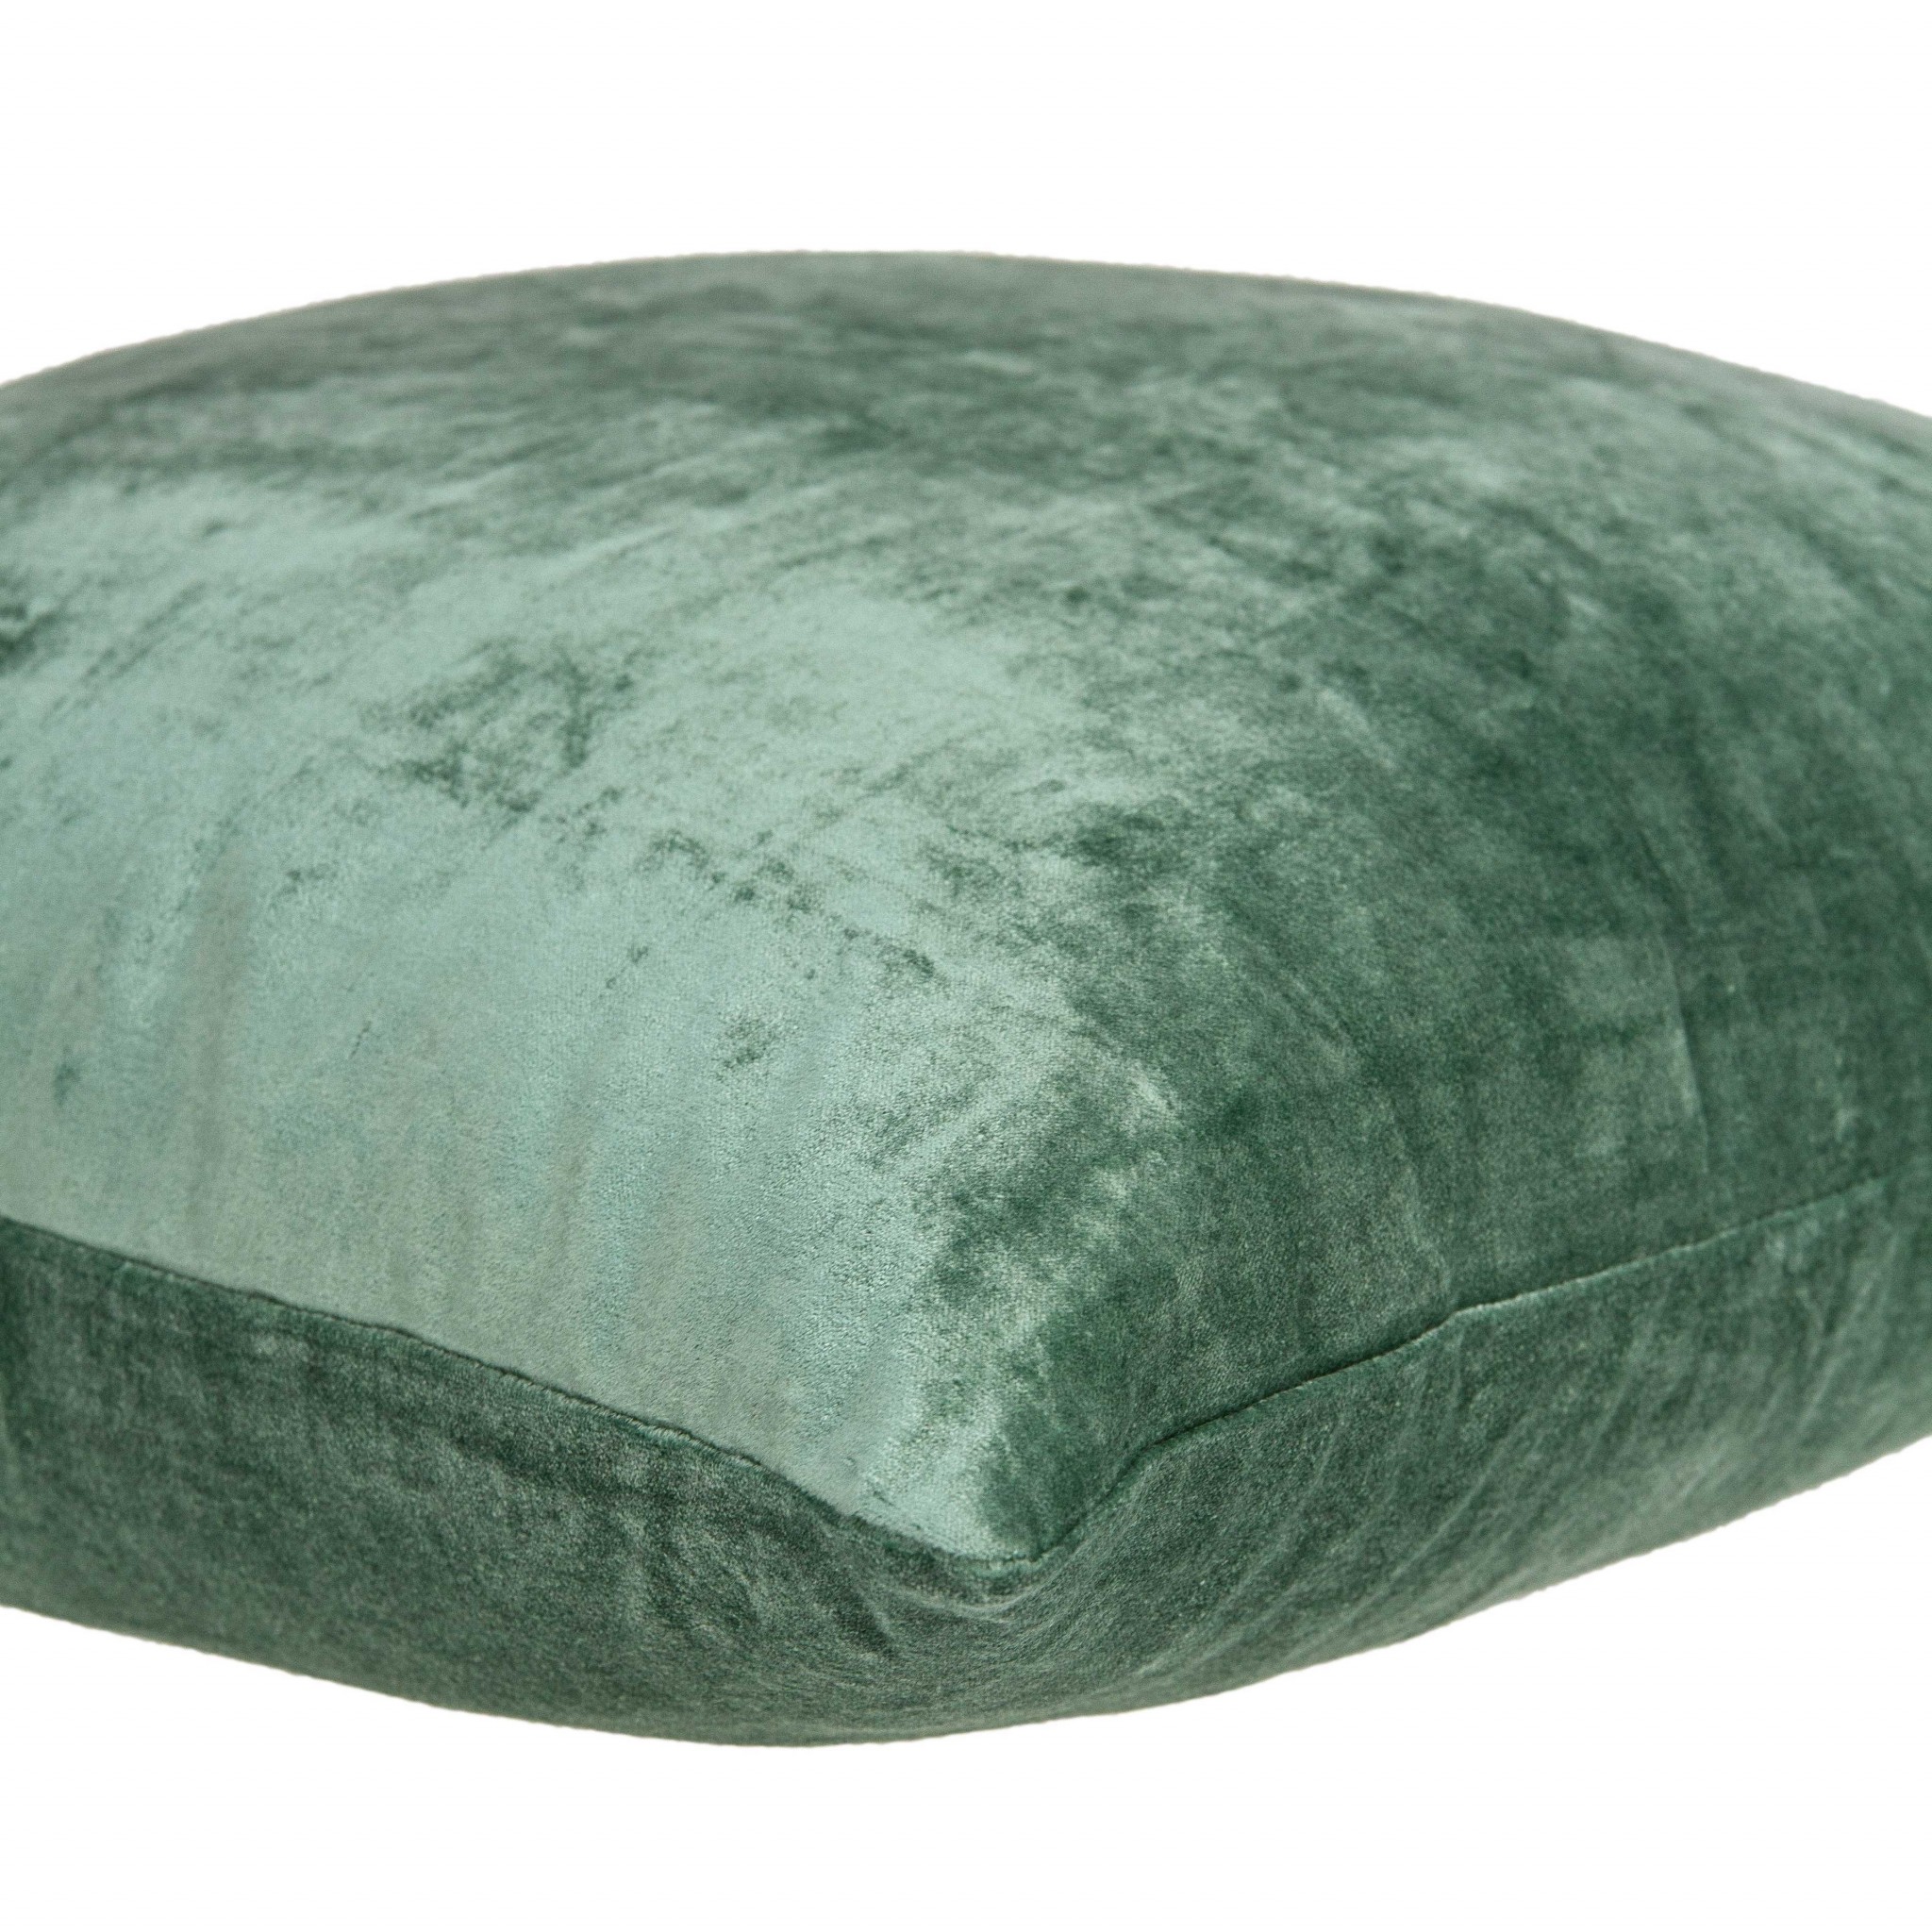 18" x 7" x 18" Transitional Green Solid Pillow Cover With Down Insert